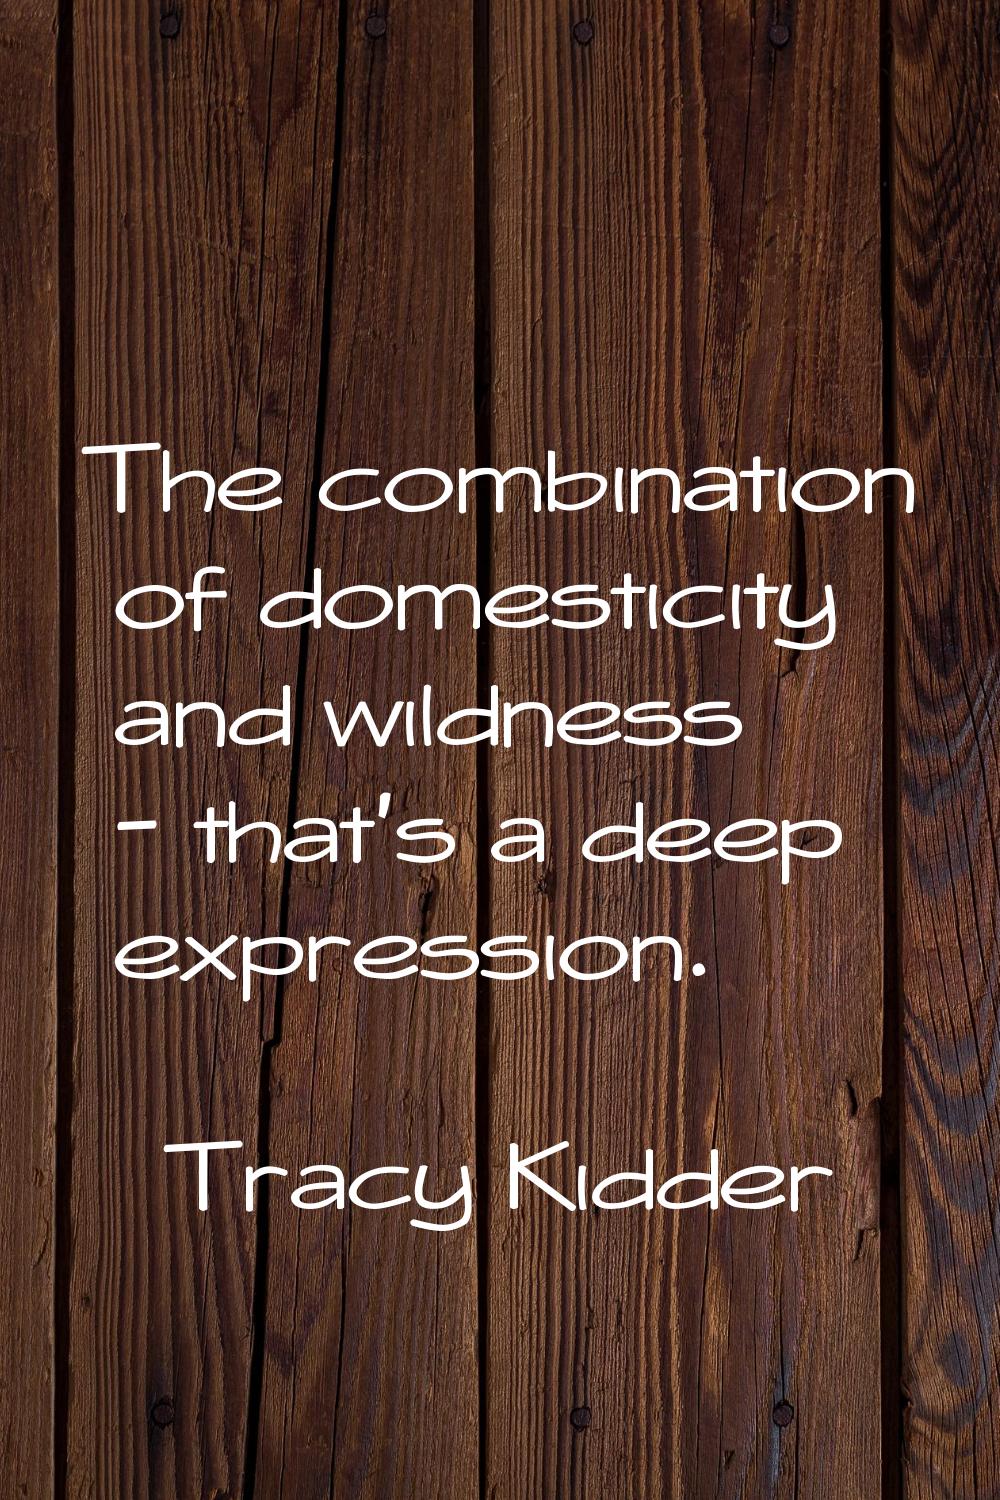 The combination of domesticity and wildness - that's a deep expression.